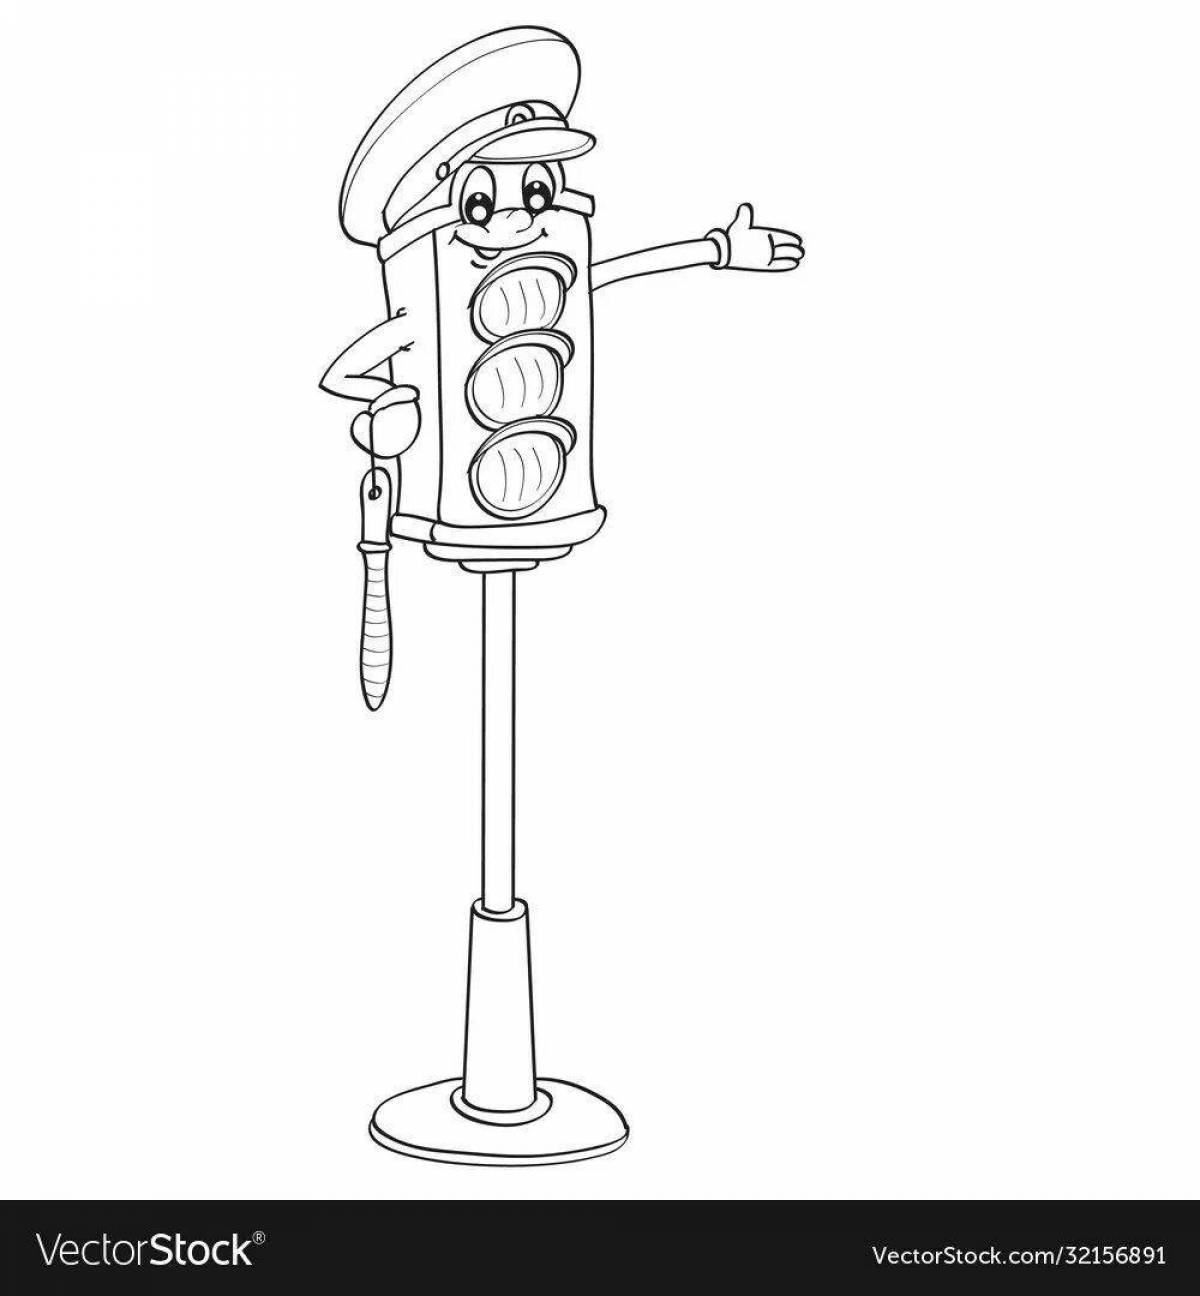 Vibrant coloring page of the traffic controller for children